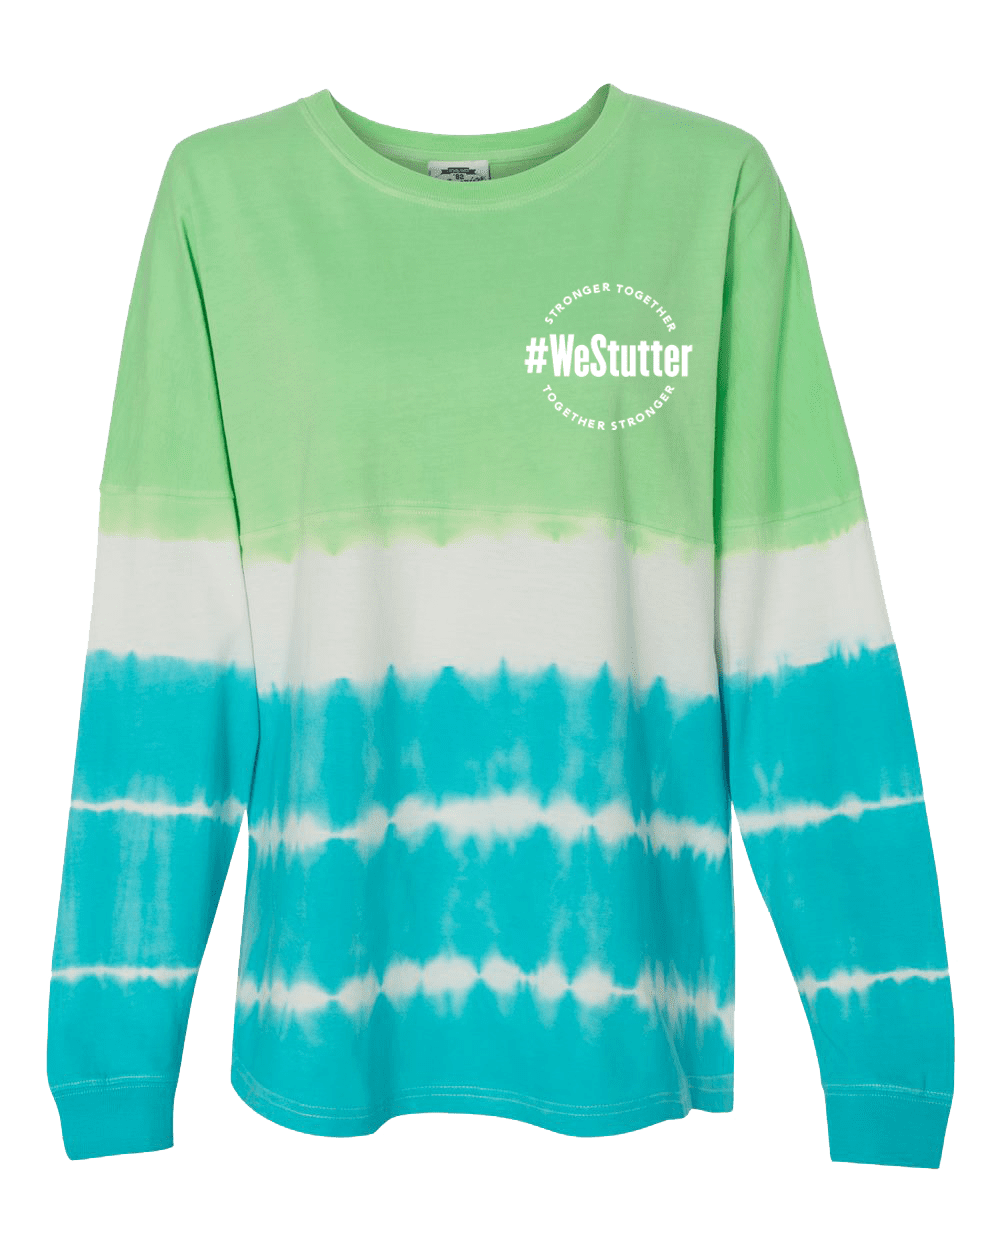 Green and white tie-dye #WeStutter Long-Sleeved Tie Dye Tee with long sleeves and hashtag "#westutter" printed in bold on the left chest area. no background, just the shirt.